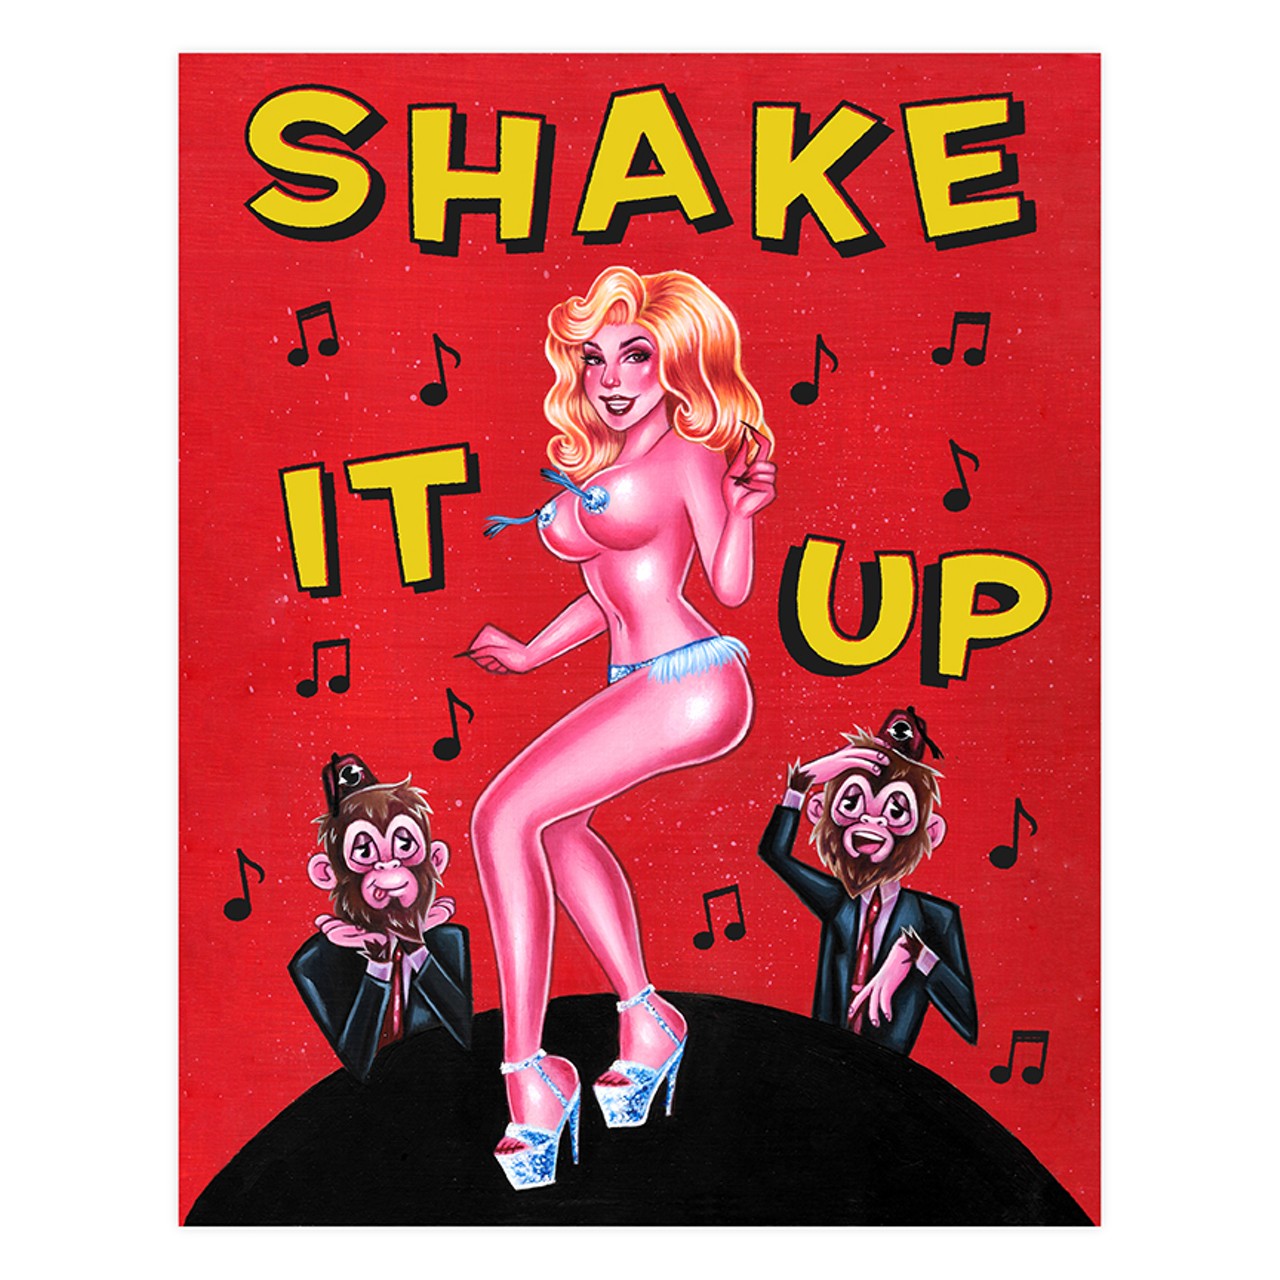 "Shake it Up" by Connie Chapa